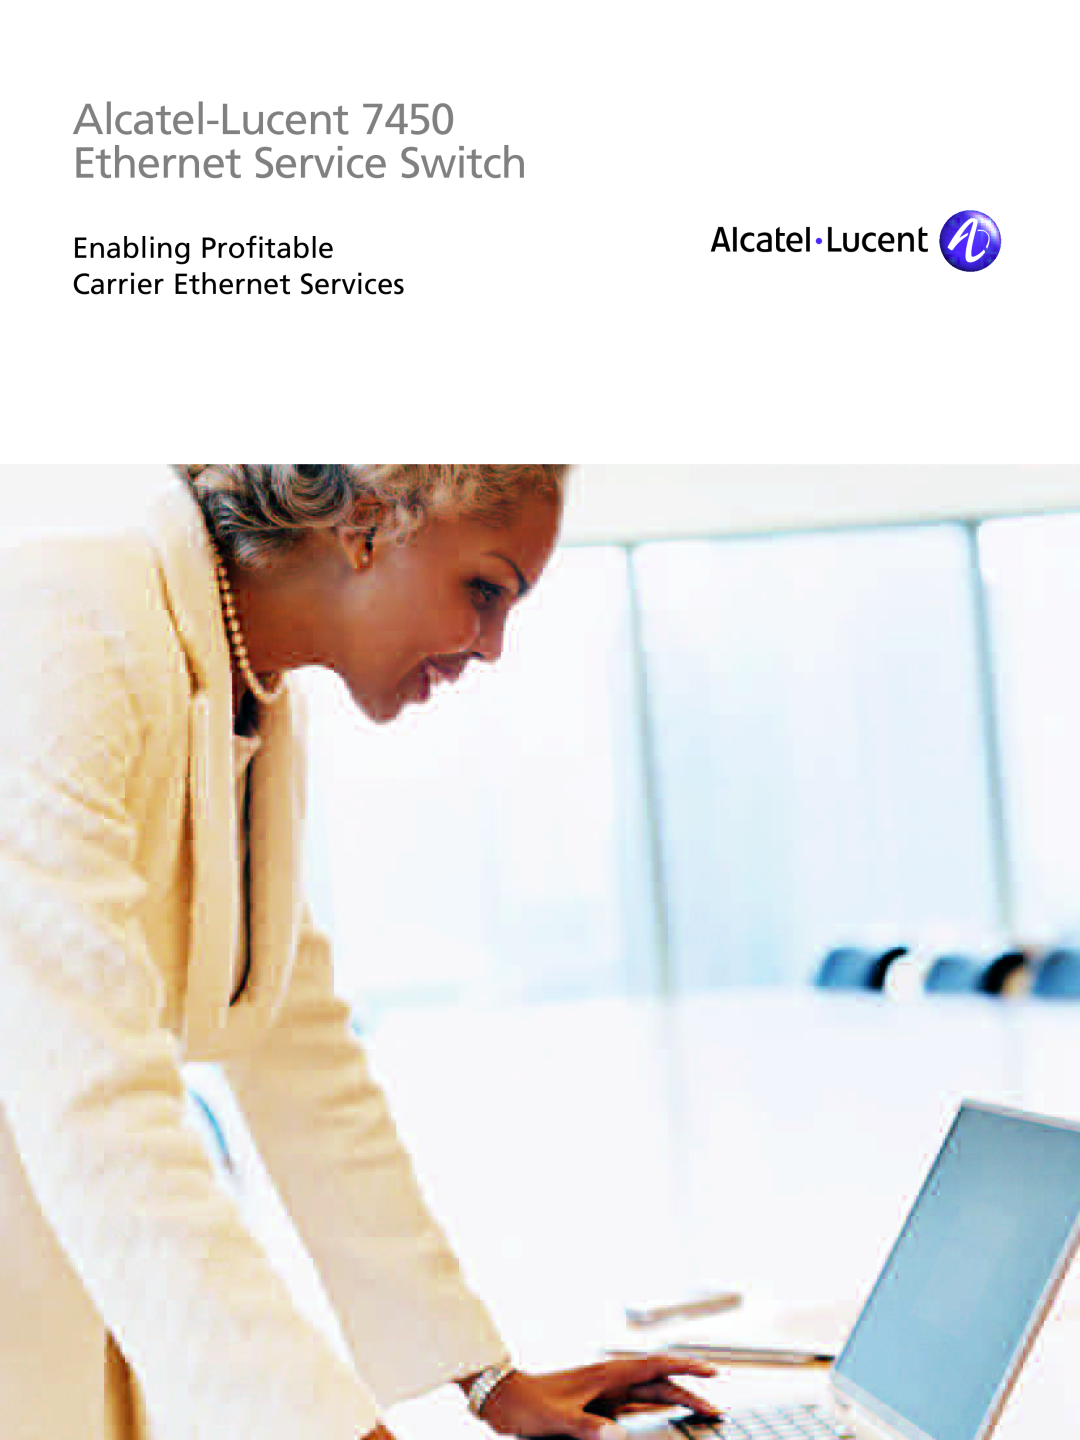 Riverstone Networks manual Alcatel-Lucent 7450 Ethernet ServiceSwitch, Enabling Profitable Carrier Ethernet Services 